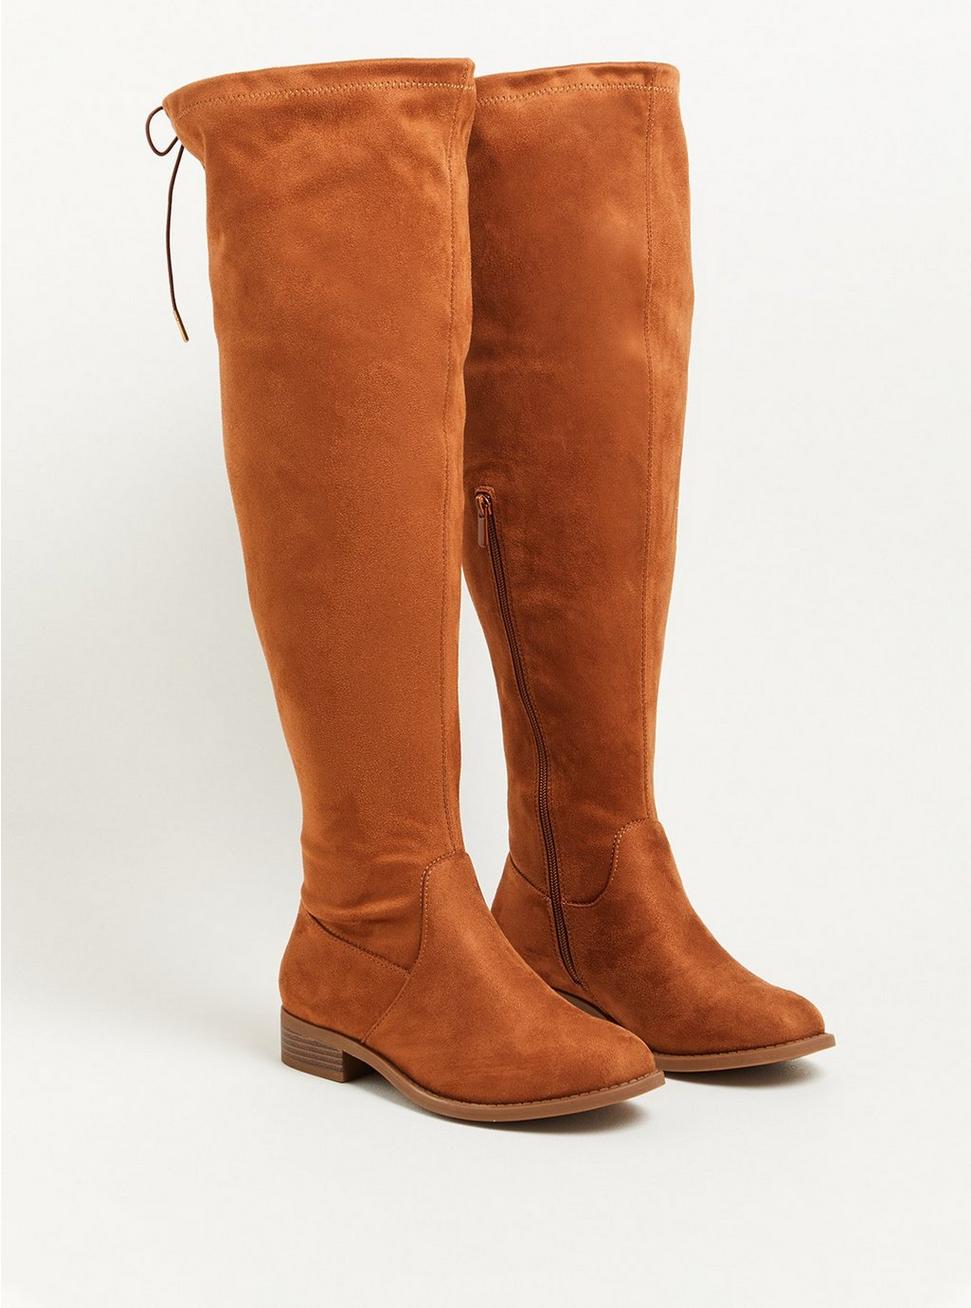 Stretch Flat Over The Knee Boot (WW), CAMEL, hi-res